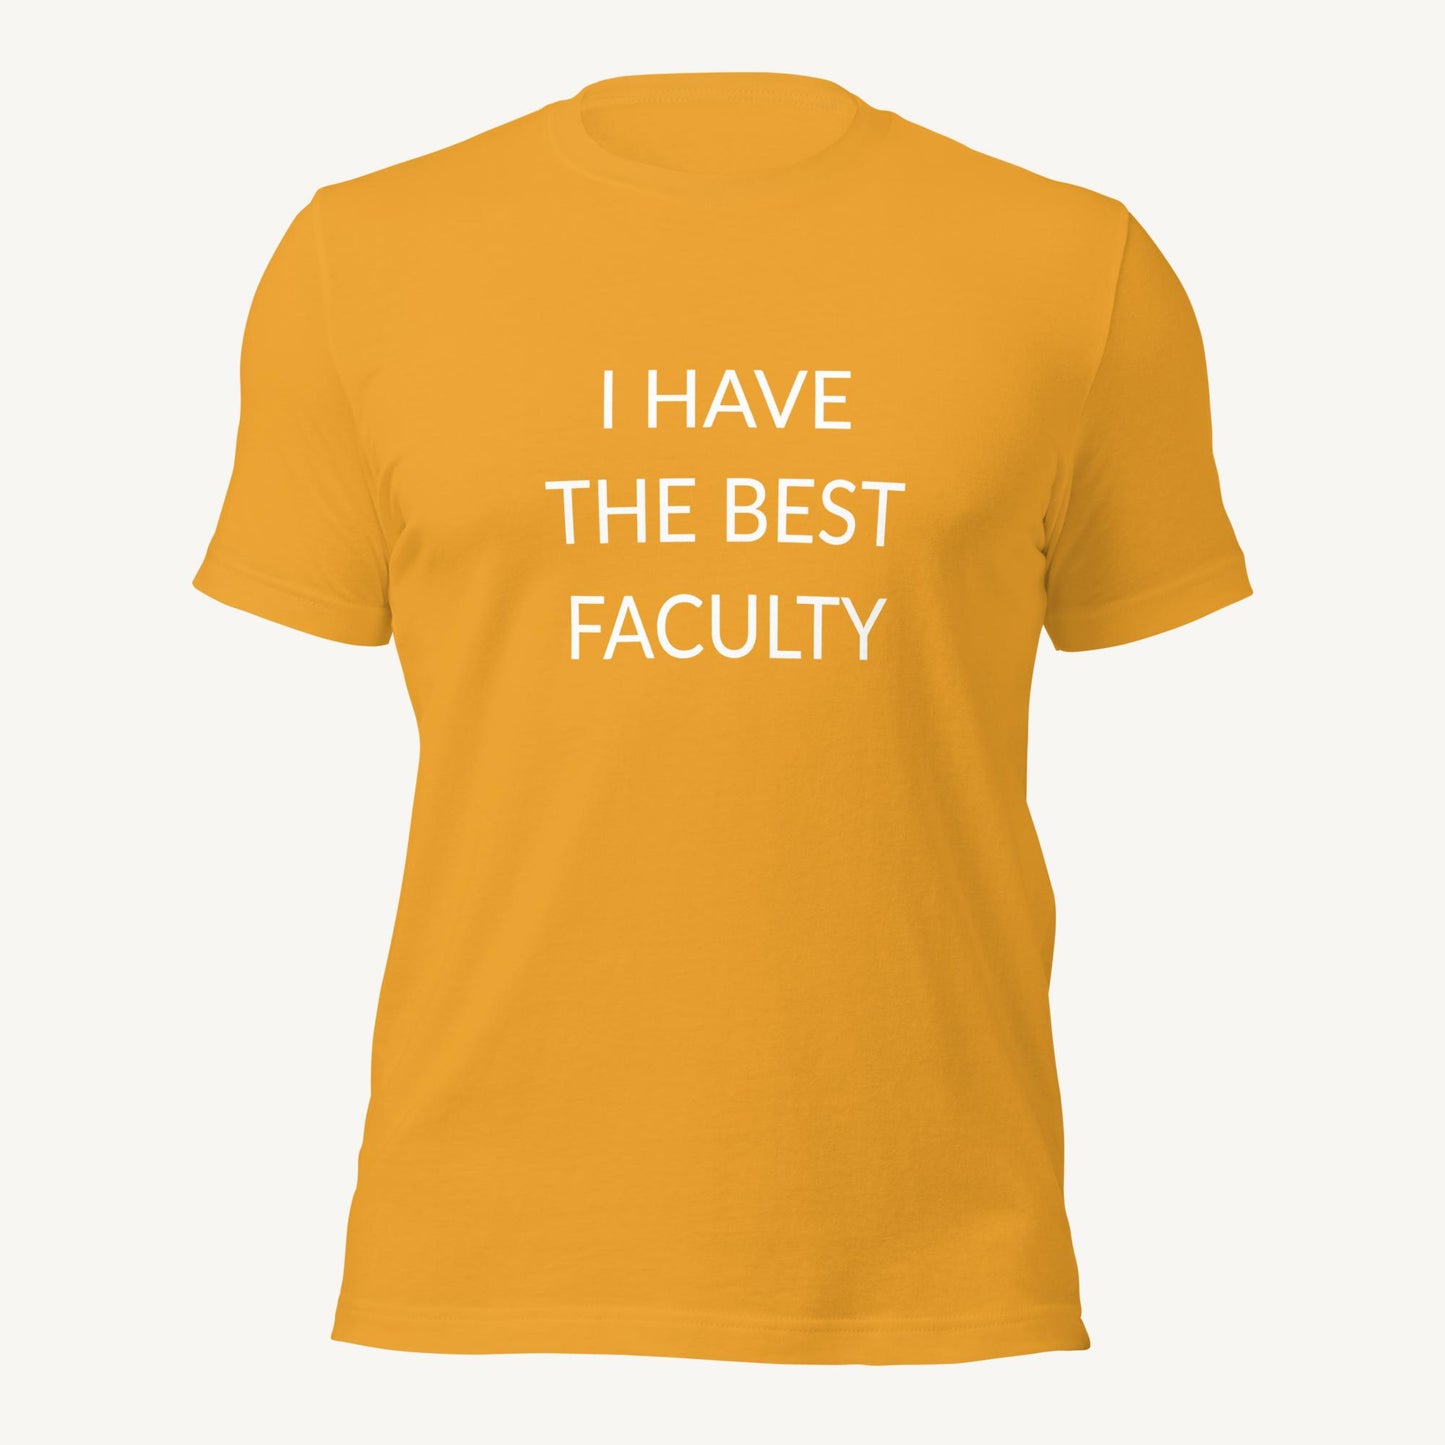 "I have the best faculty" | Unisex T-Shirt